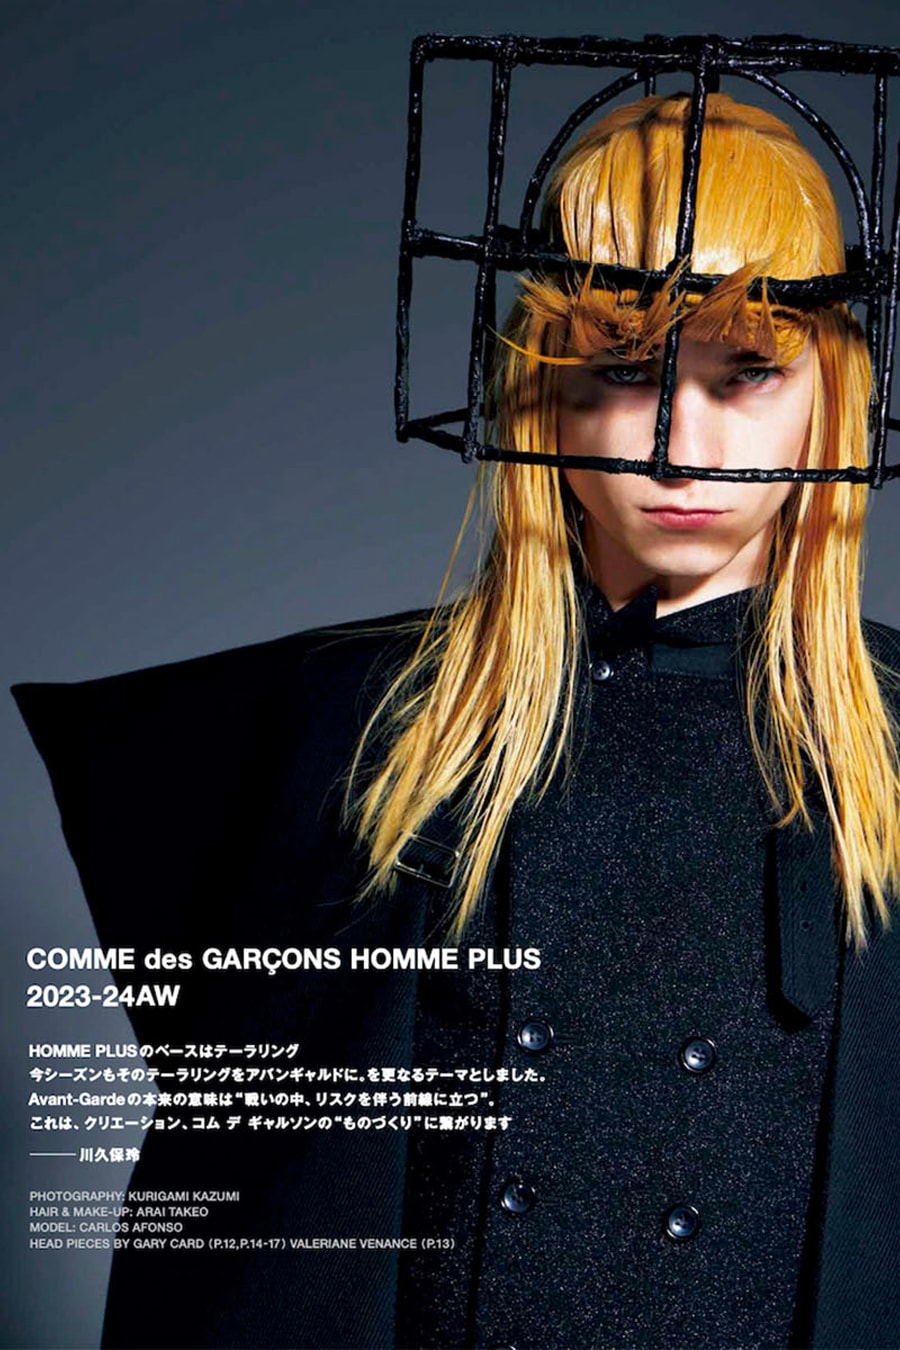 'Switch' Magazine To Launch COMME des GARÇONS 50th Anniversary Issue